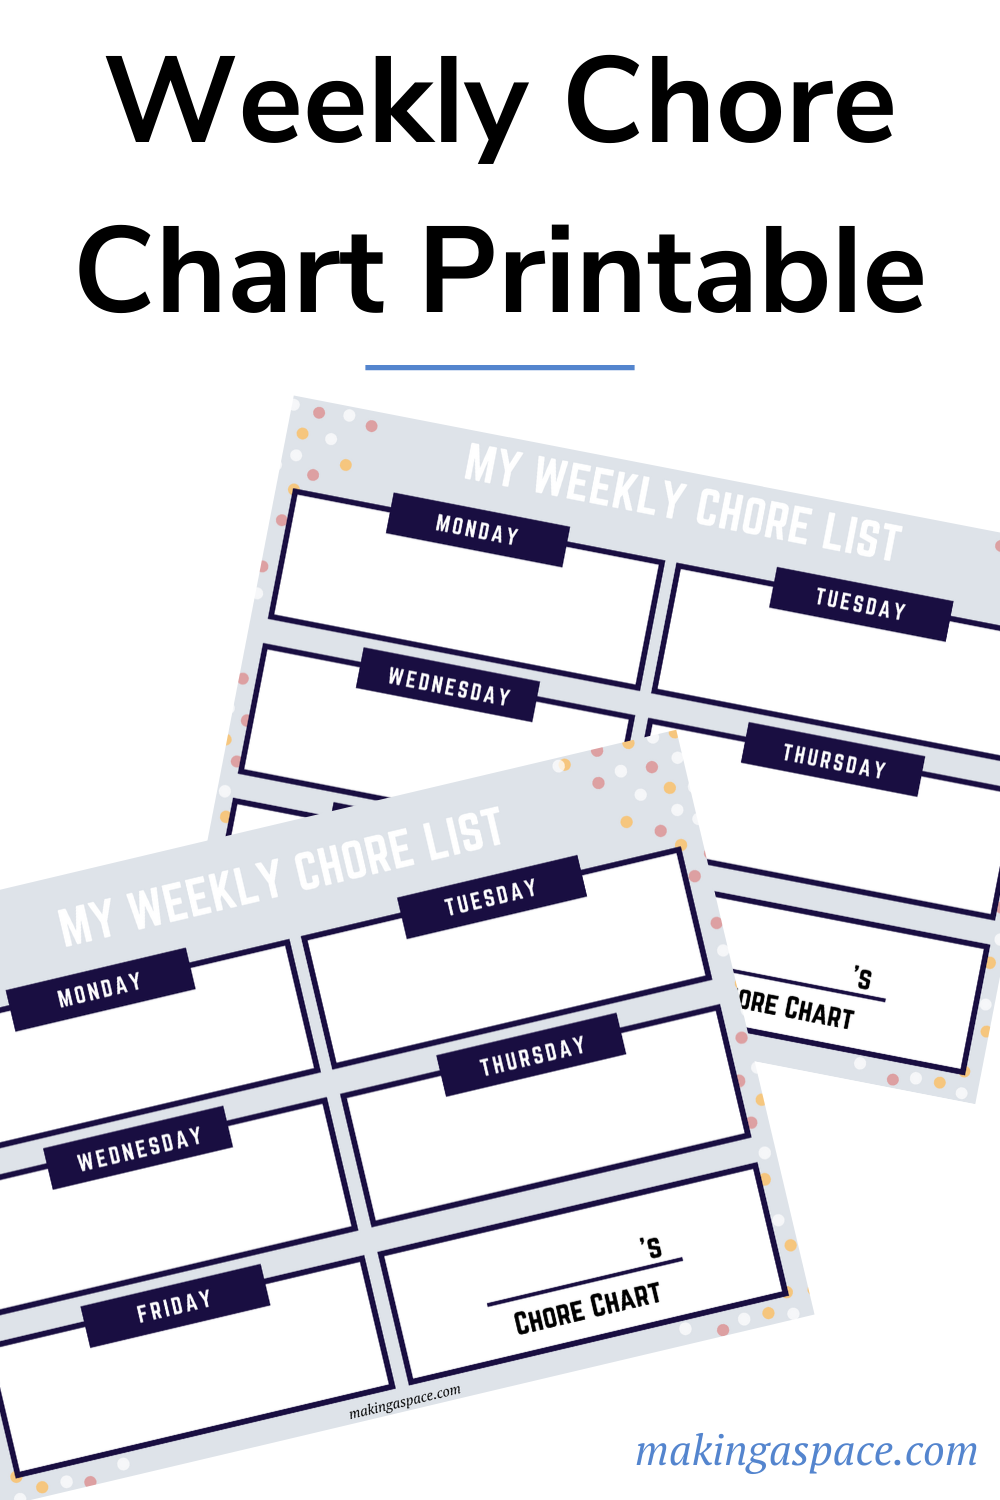 Free Printable Chore Chart for Weekly Chores